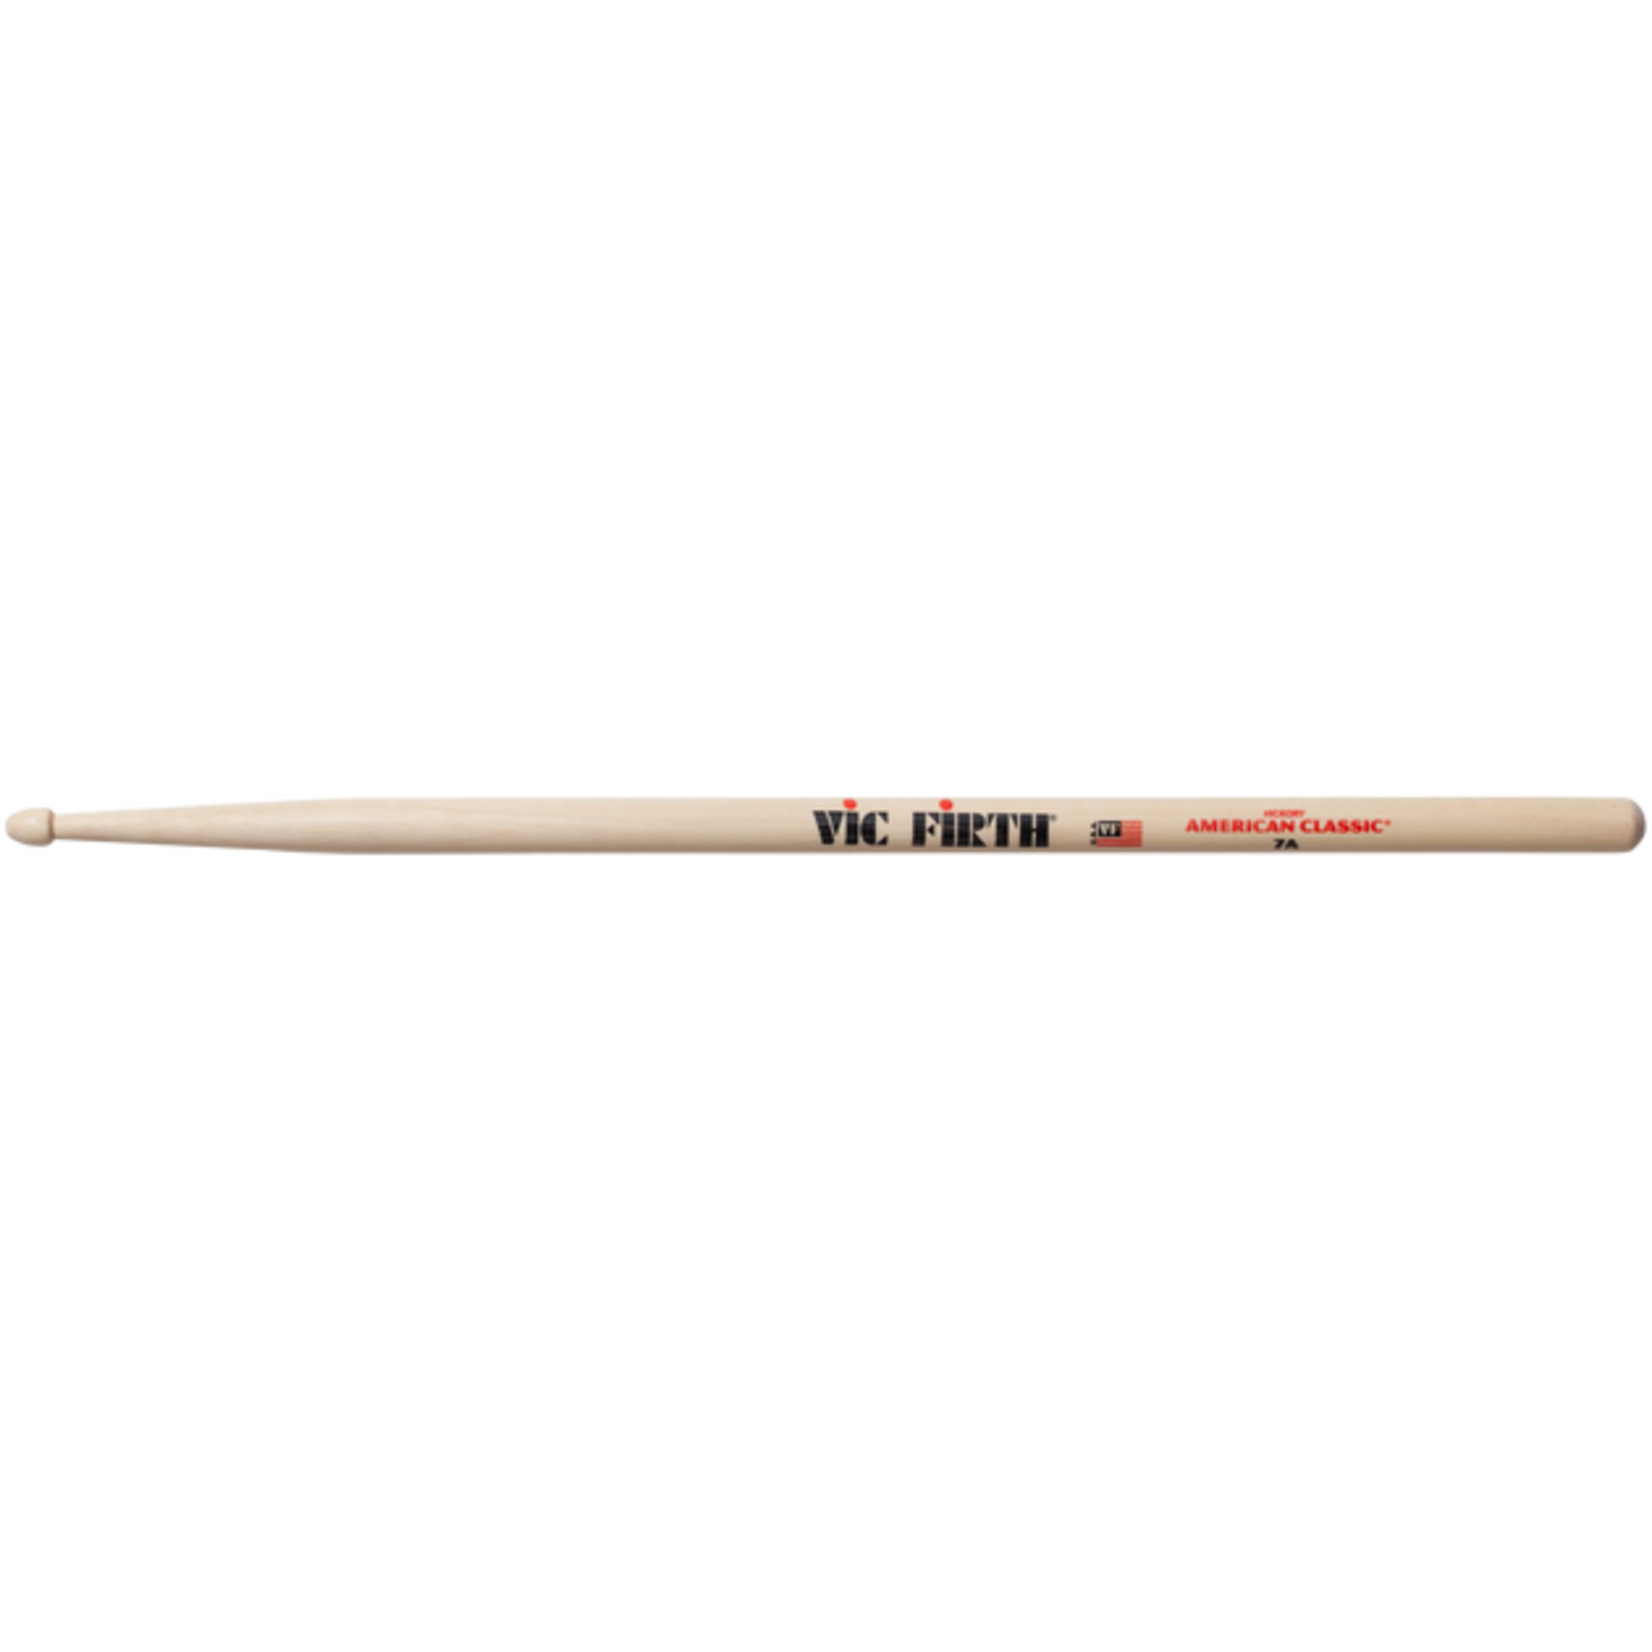 VIC FIRTH AMERICAN CLASSIC 7A WOOD TIP - 2112 PERCUSSION